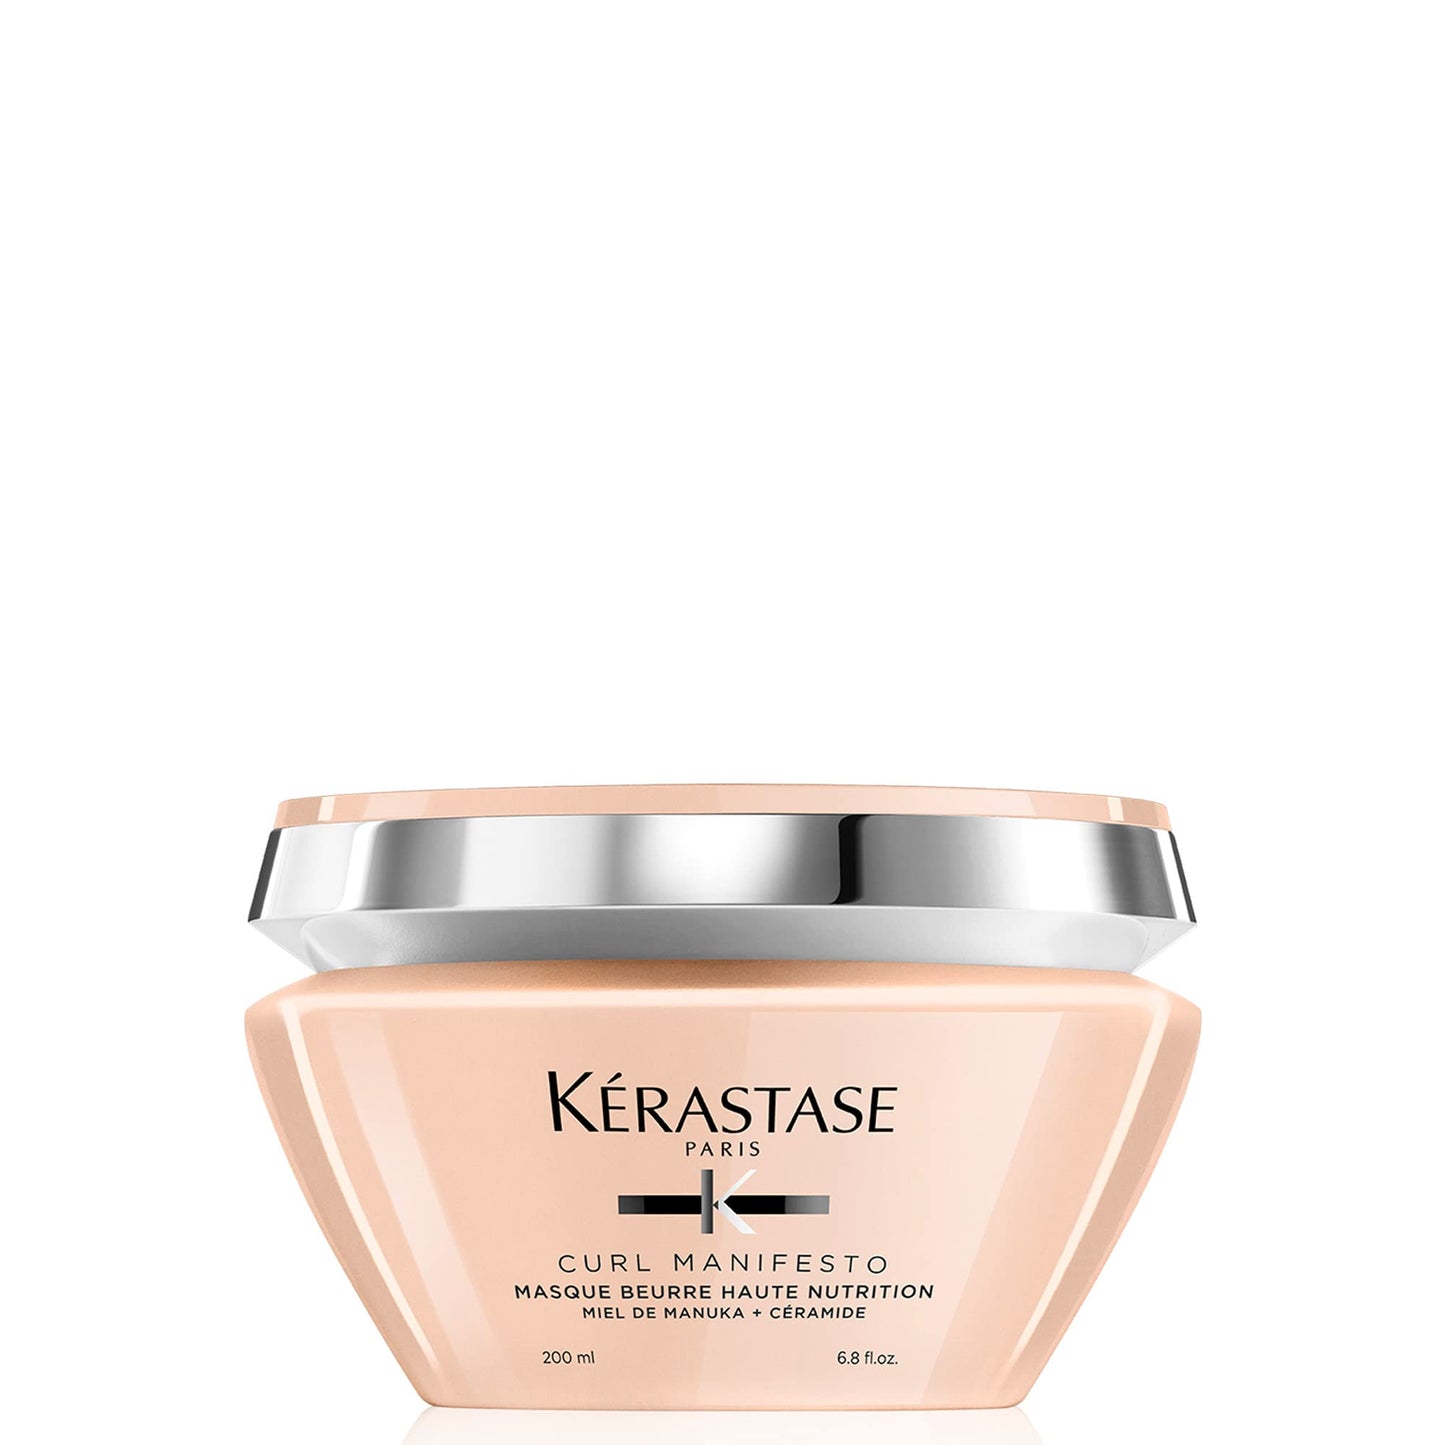 KERASTASE Curl Manifesto Beurre Haute Nutrition Hair Mask | Strengthens & Prevents Breakage | Adds Softness & Shine | For All Wavy, Curly, Very Curly & Coily Hair | 6.8 Fl Oz